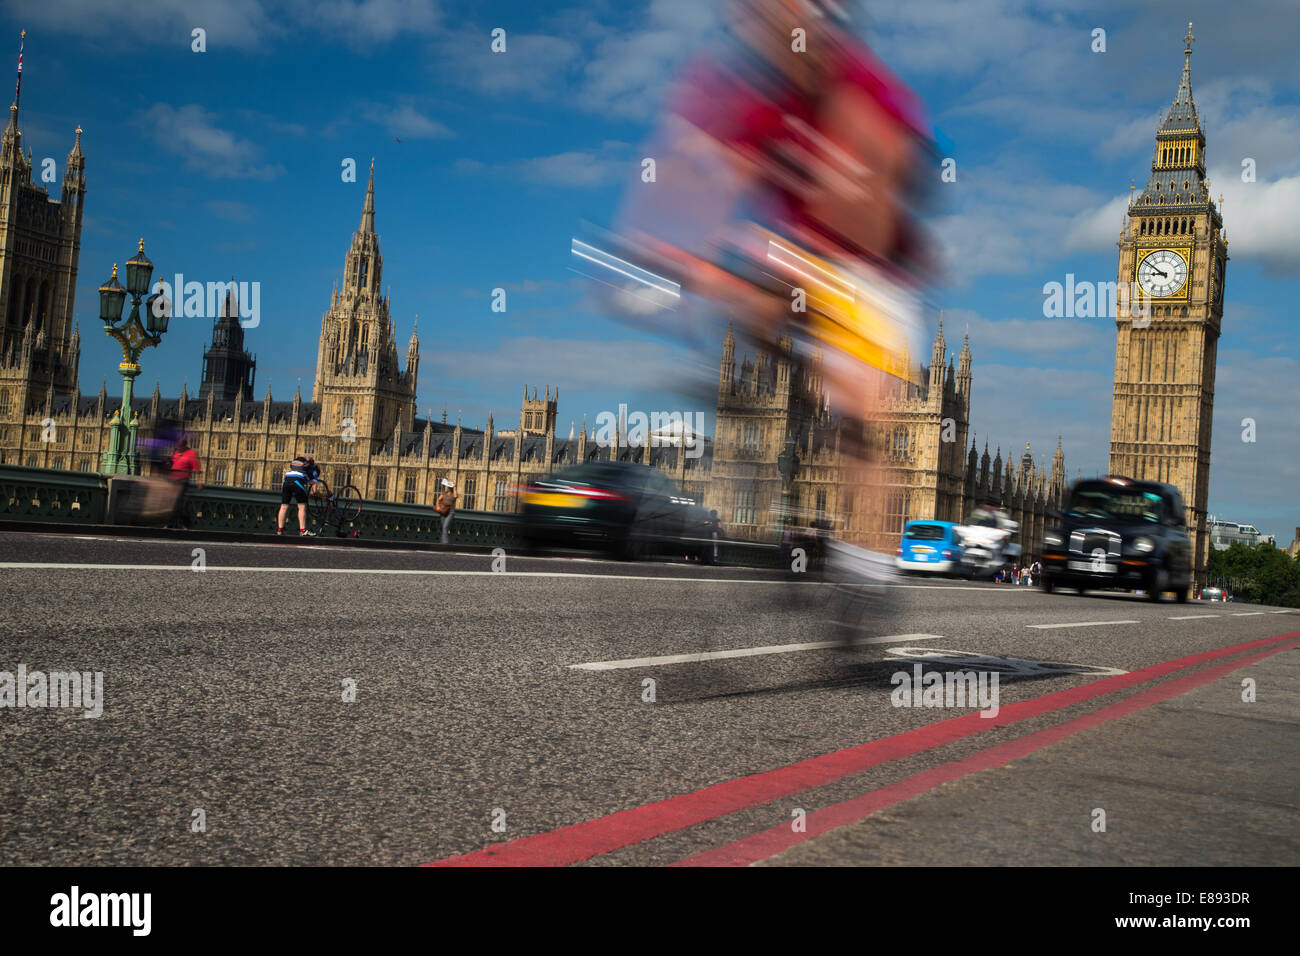 The Houses of Parliament-The Palace of Westminster-The Elizabeth Tower with Big Ben,The House of Commons and the House of Lords Stock Photo